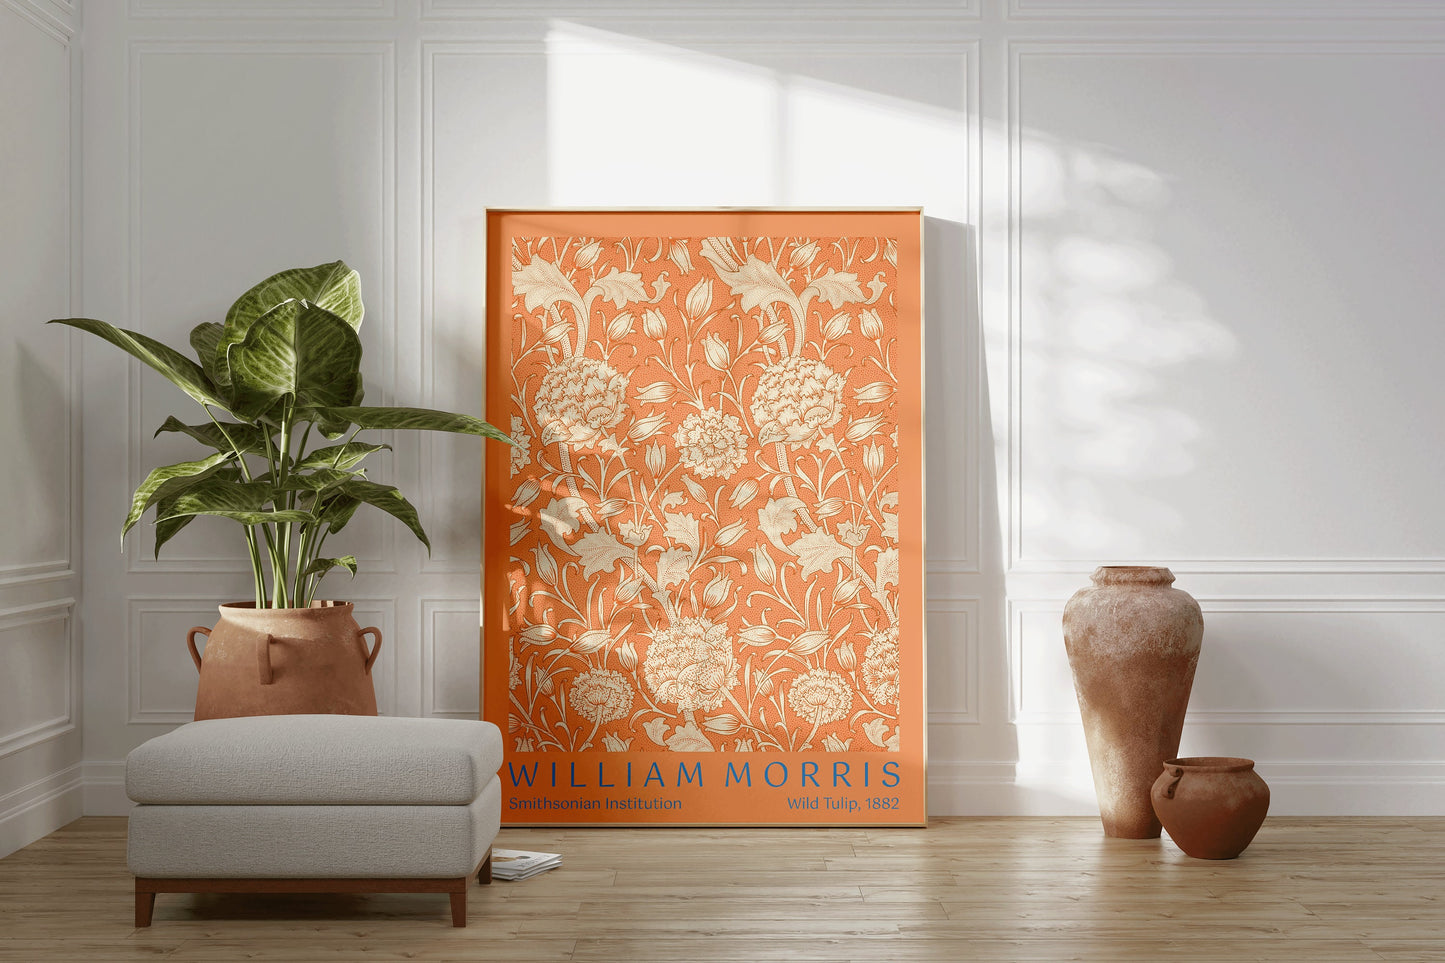 Framed William Morris Tulip Poster Wild Exhibition Poster Museum Art Print Nouveau Flower Pattern Market Museum Ready to hang Home Decor